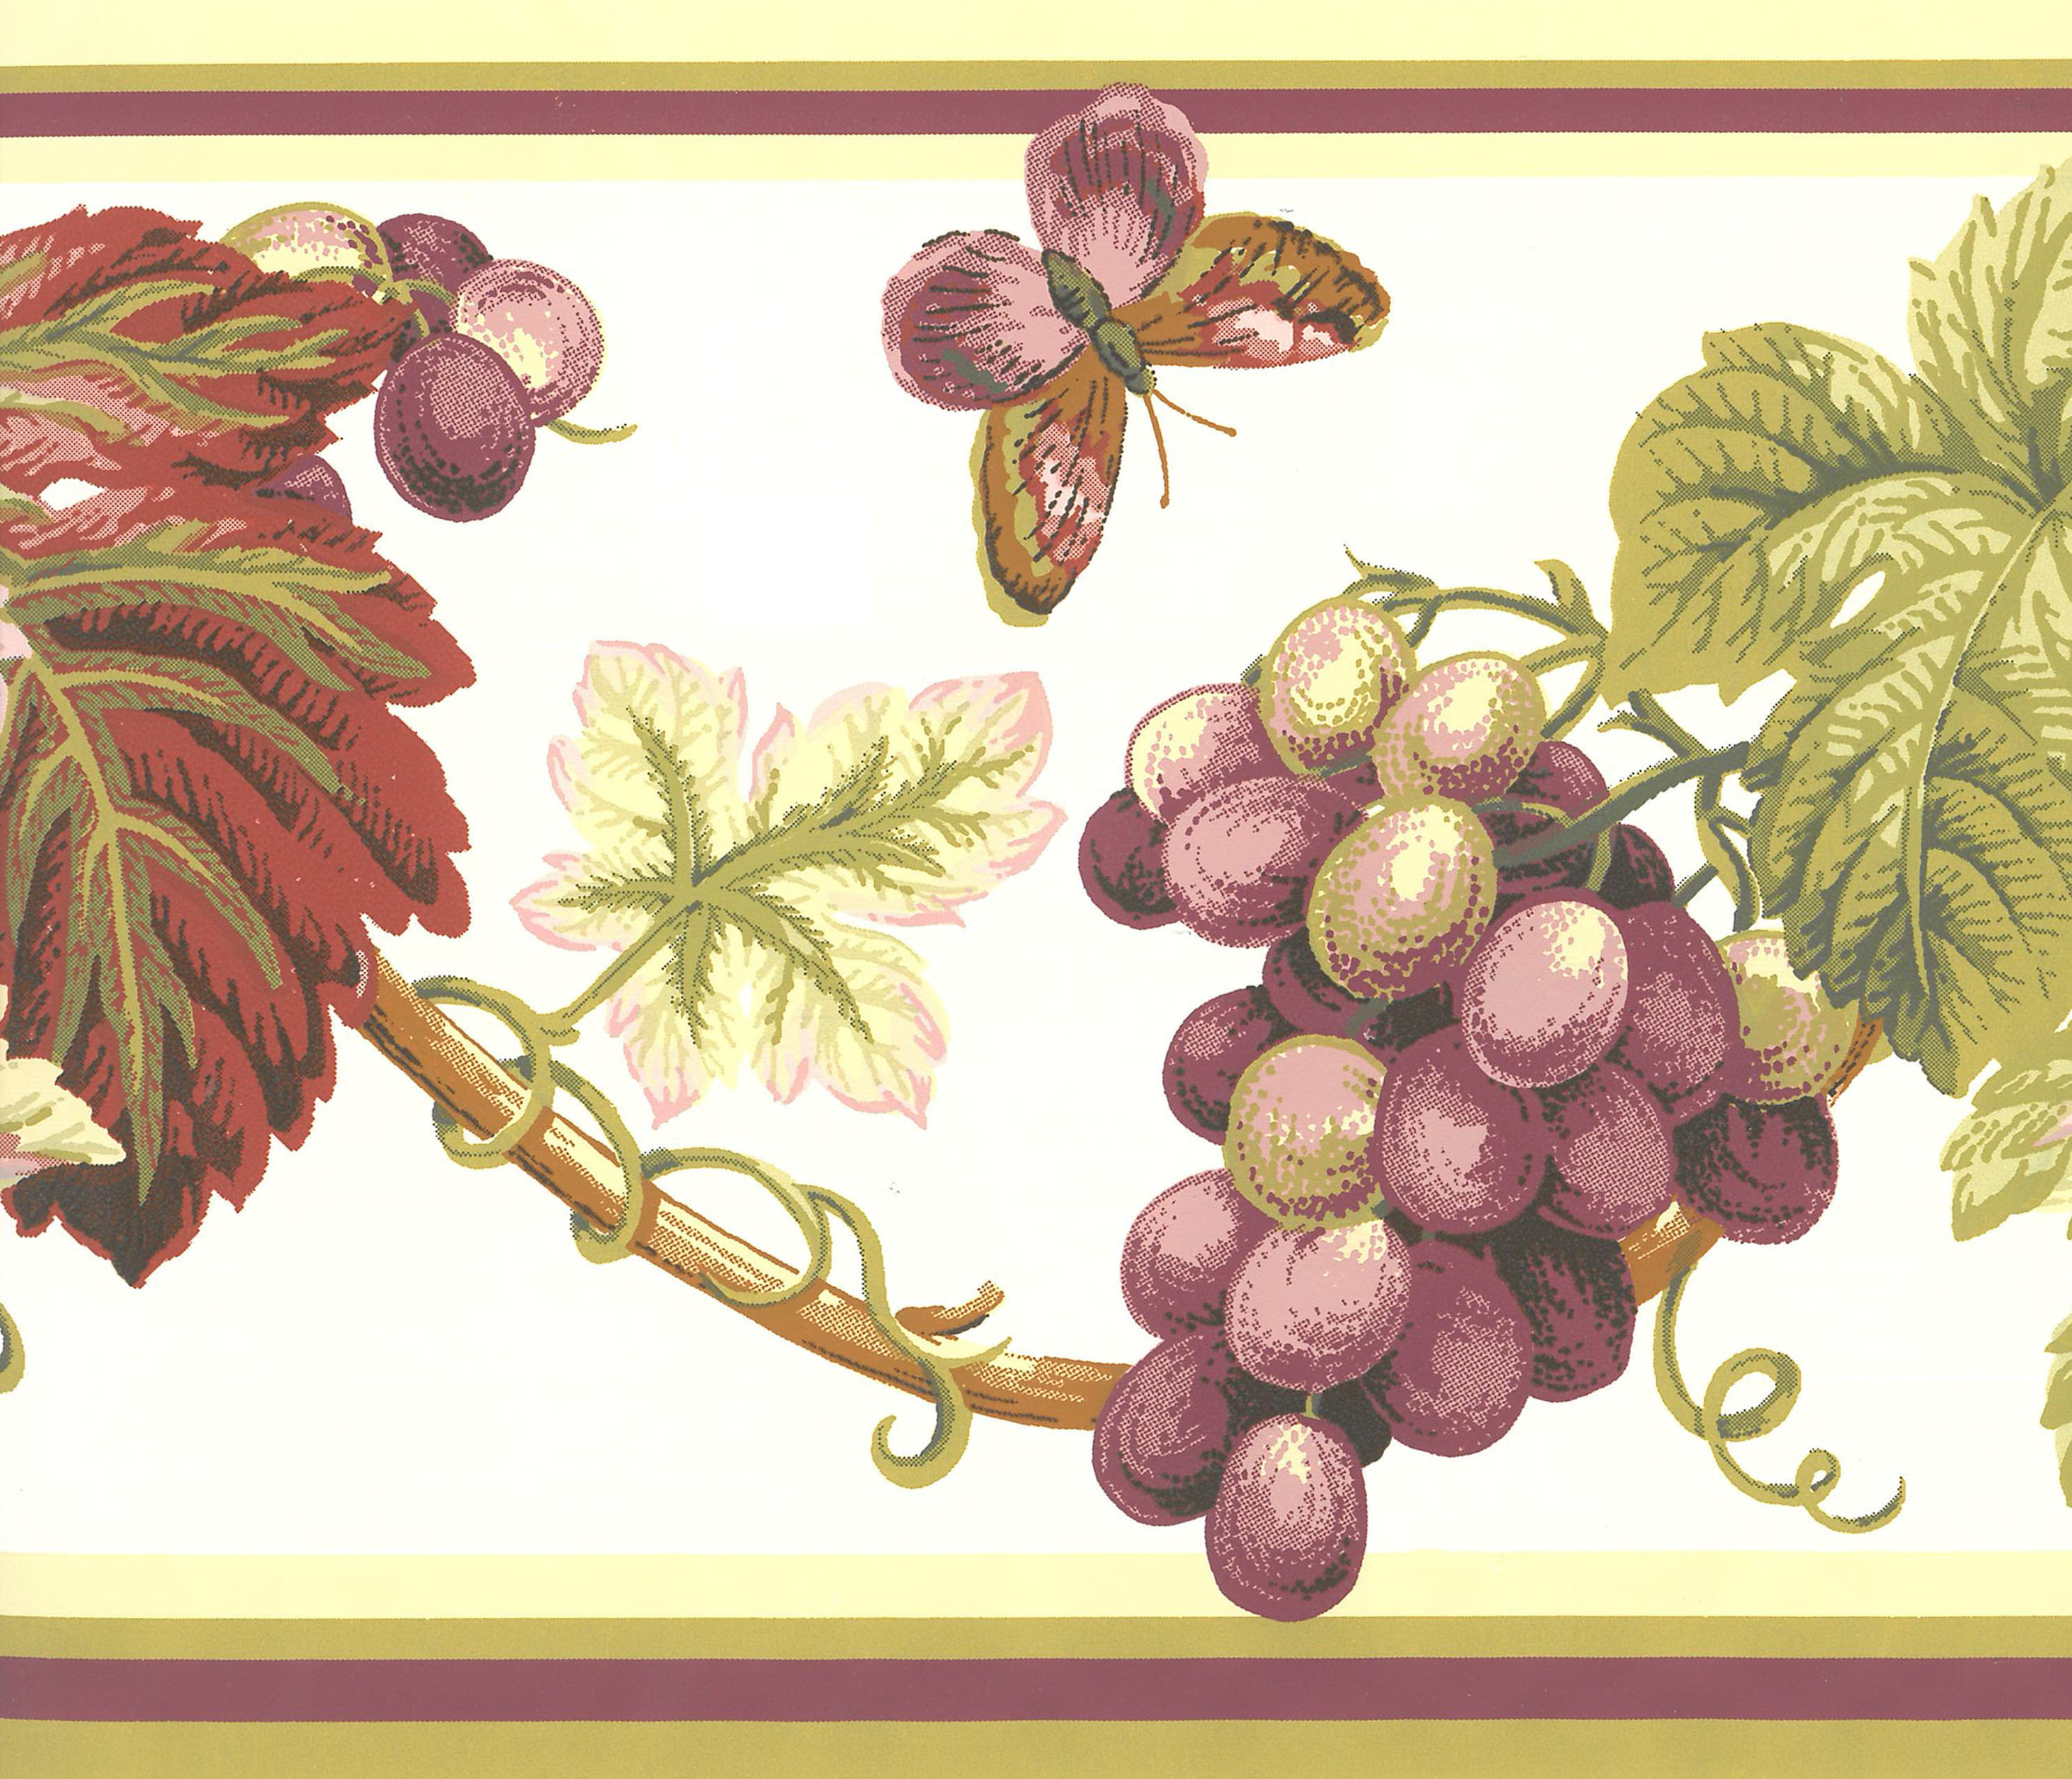 Pink Grapes on Vine Wall Border Retro Design 15 ft x 8 in Dundee Deco BD6129 Prepasted Wallpaper Border Purple Red Floral Green 4.57m x 20.32cm 